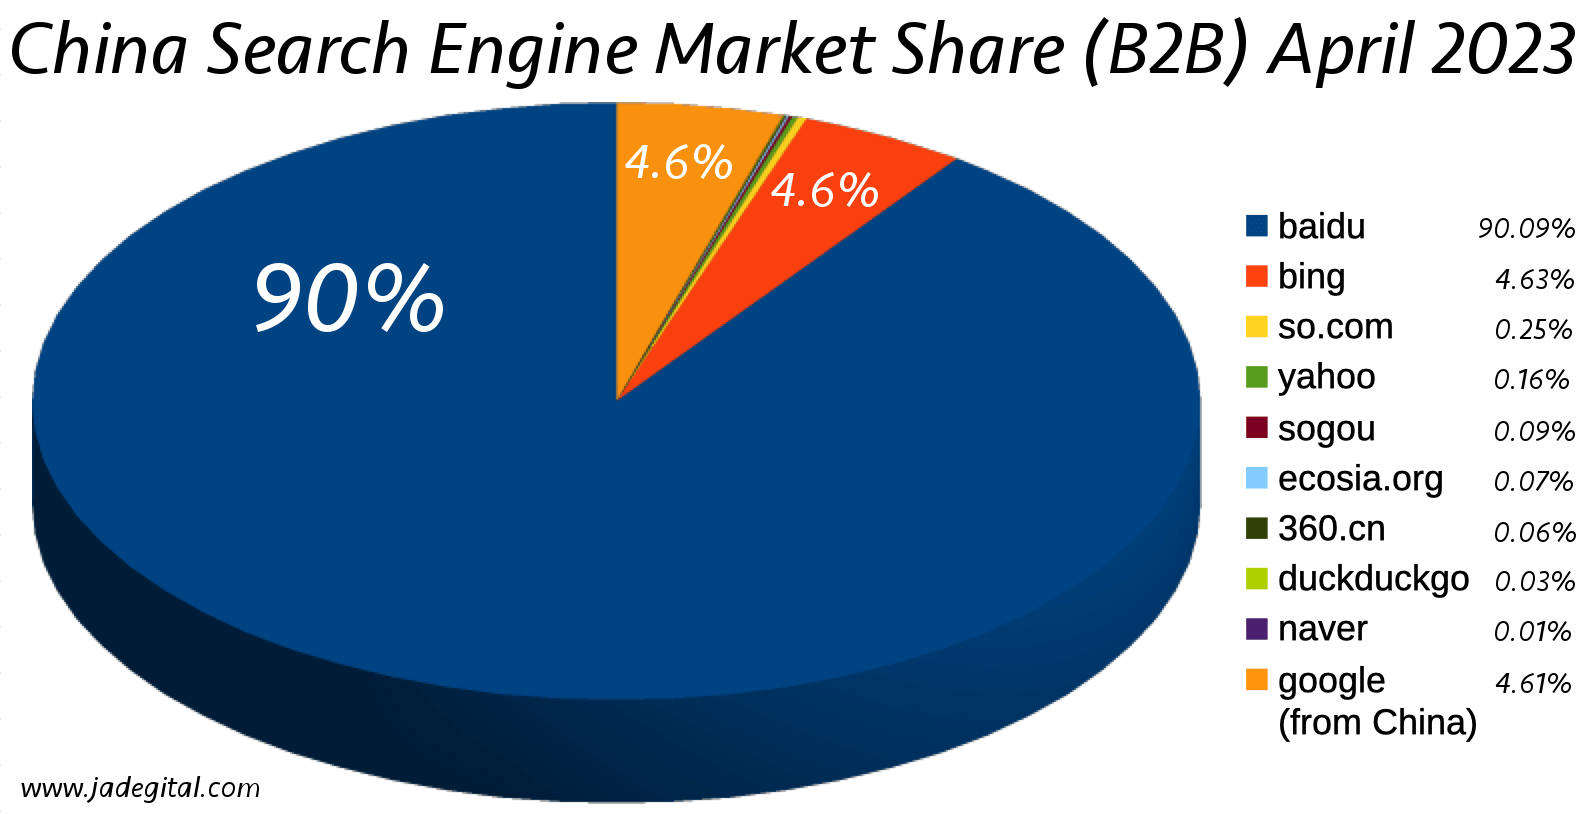 Search Engine Market Share (Organic Search) in China for B2B websites as of April 2023 (based on client sample data)